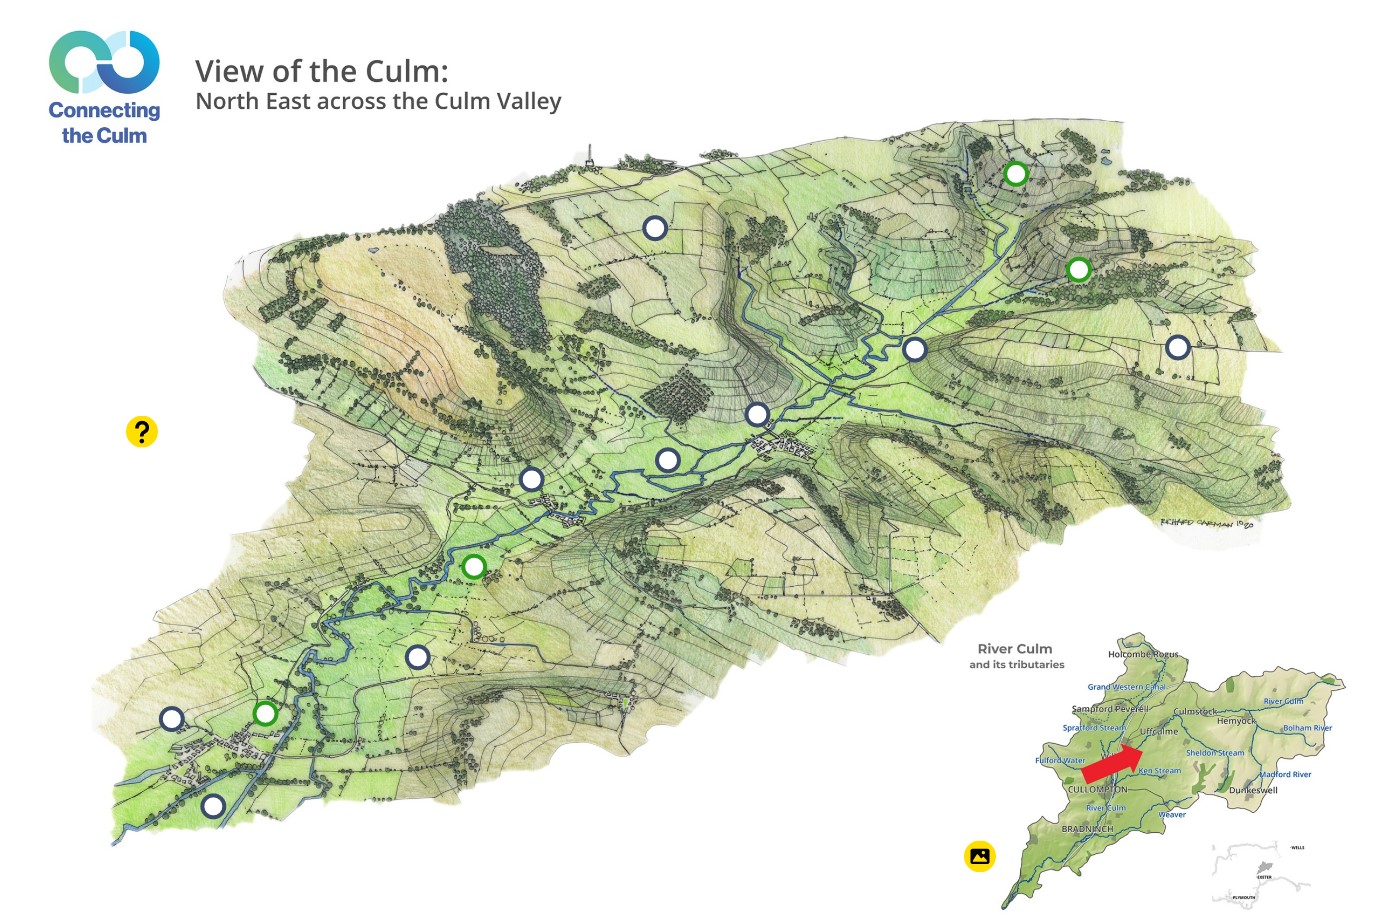 A topological illustrated map showing a stylised view north east across the Culm Valley